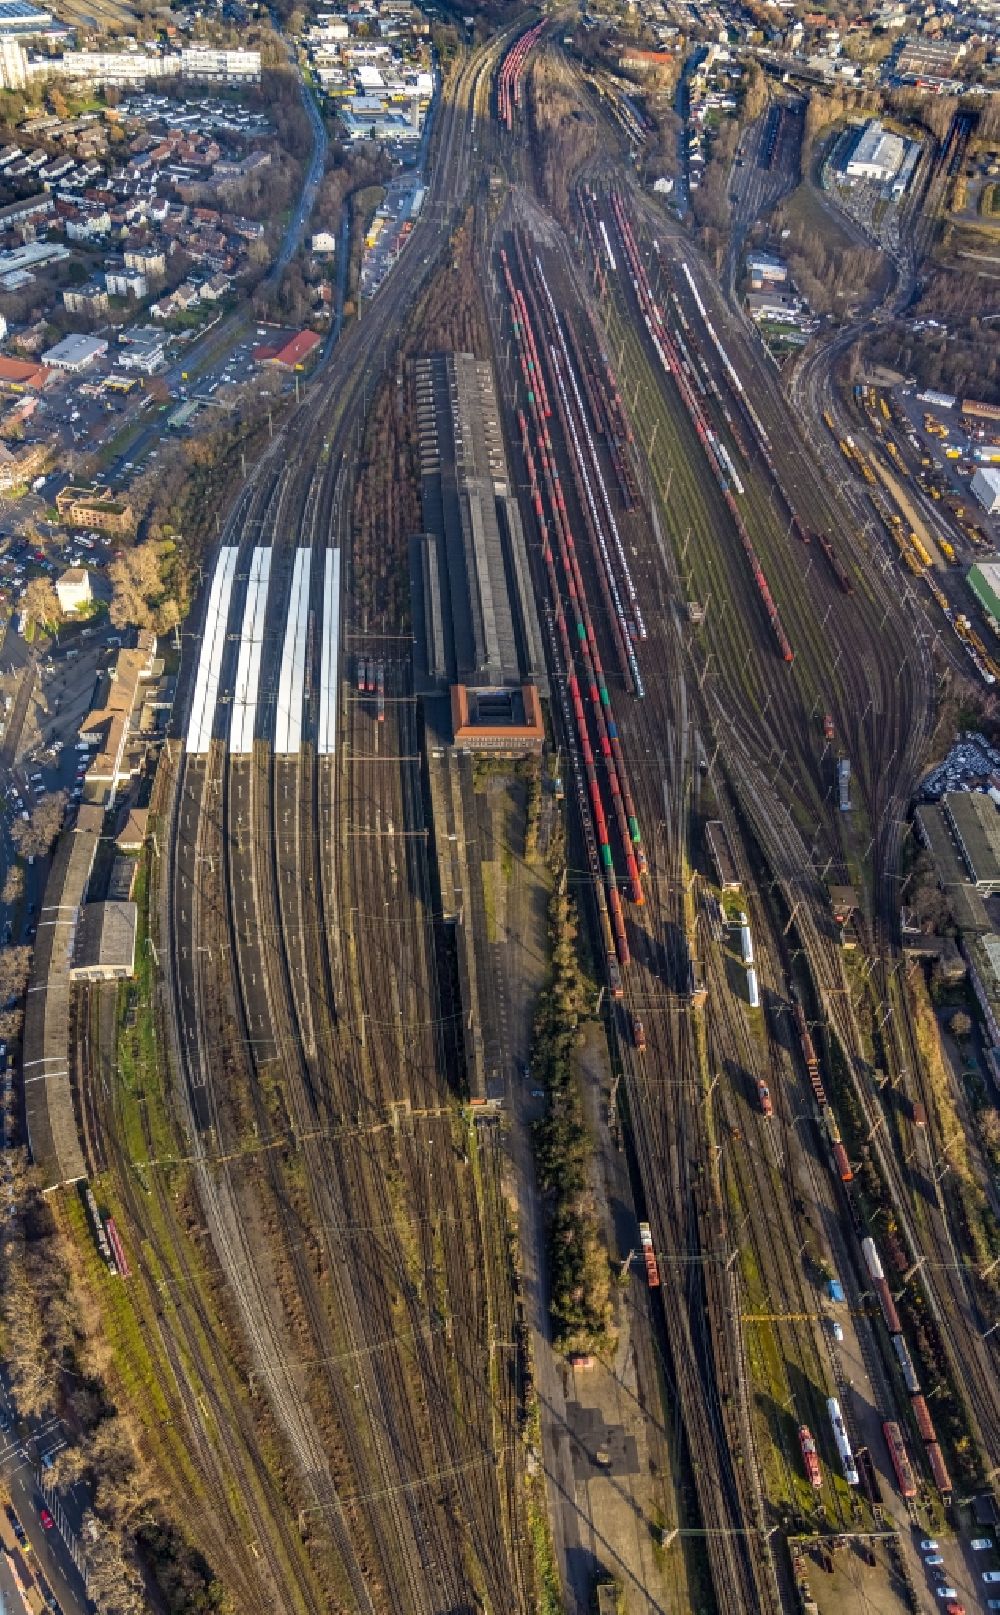 Herne from the bird's eye view: Railway tracks in the main station of Wanne-Eickel in Herne in the state of North Rhine-Westphalia